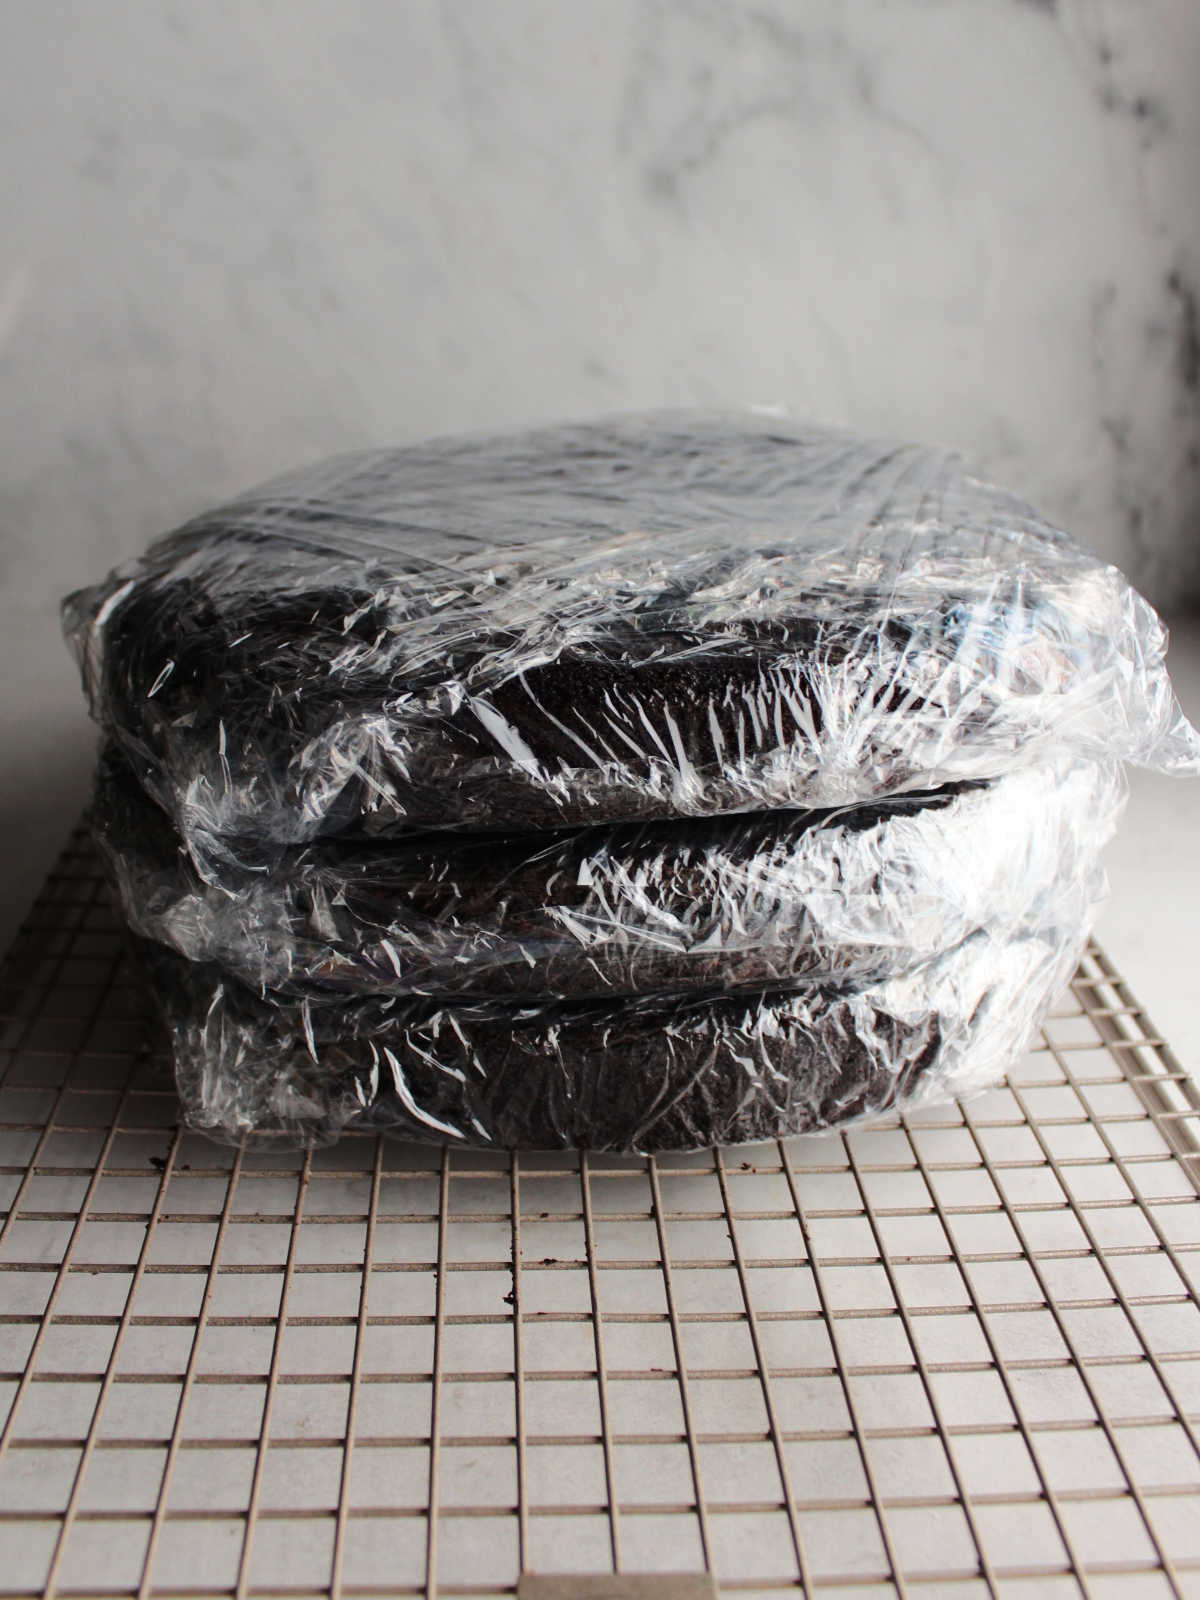 Three chocolate cake layers wrapped in plastic wrap, ready to go in the freezer.